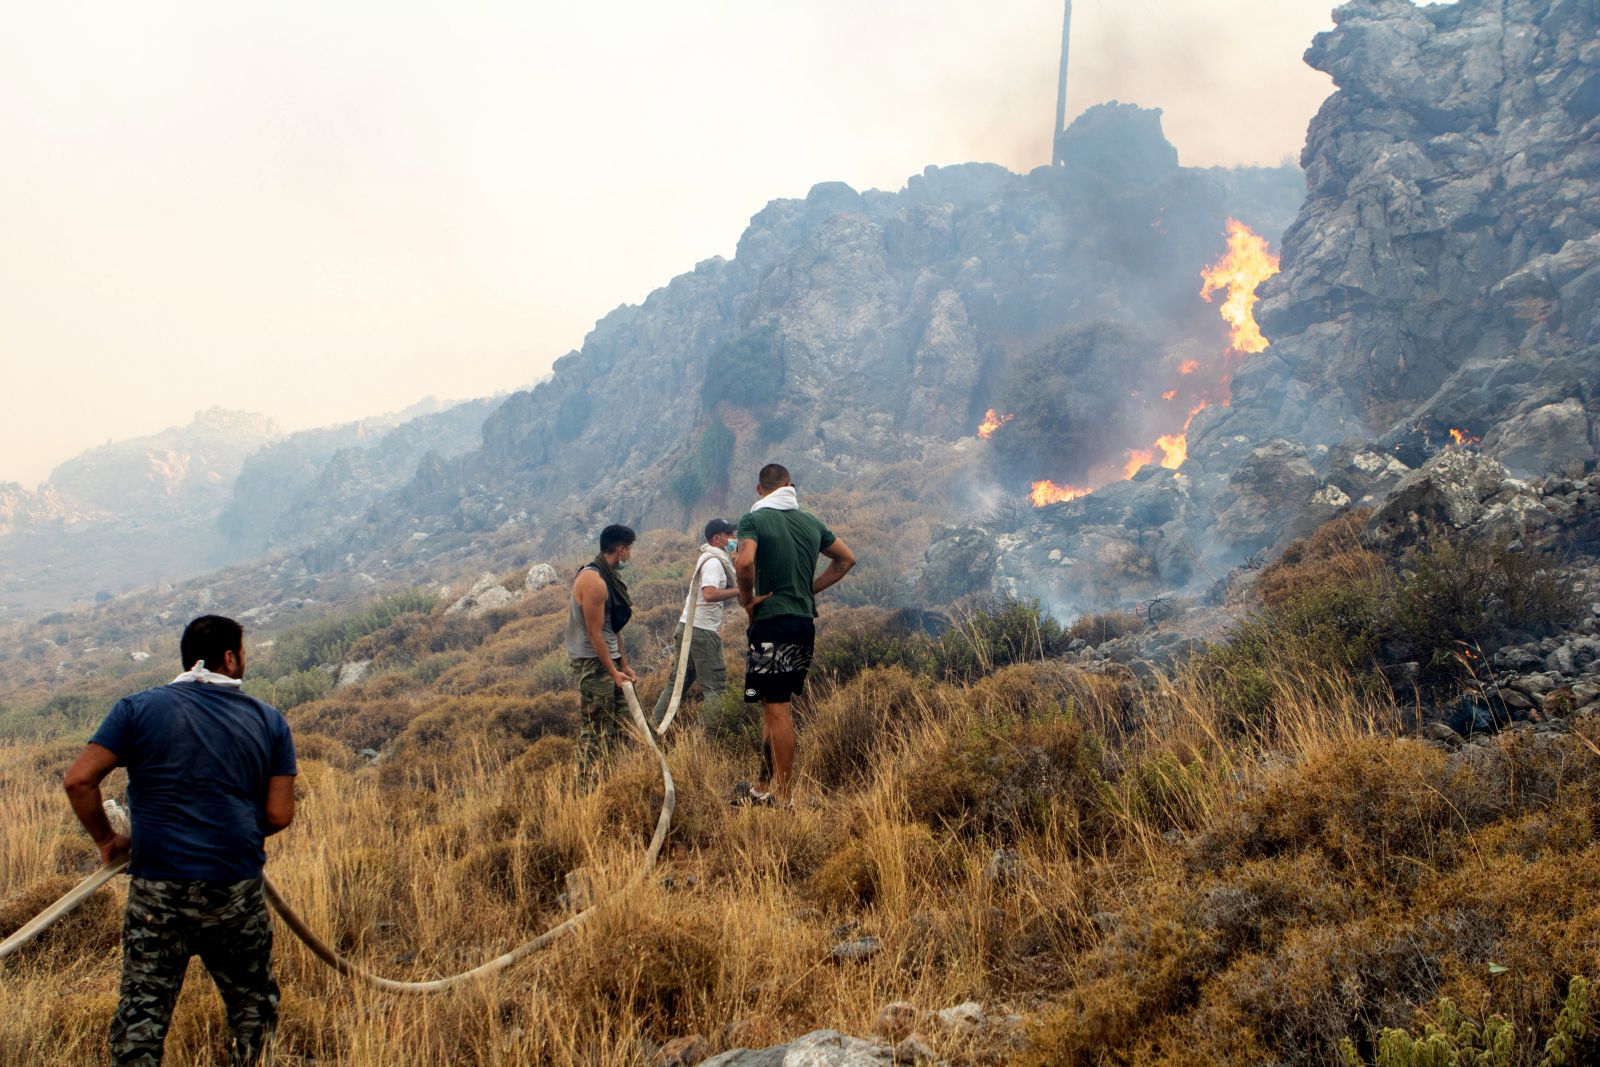 epa10762697 Volunteers try to put out a wildfire  in Kiotari village, on Rhodes island, Greece 22 July 2023. Although the Fire Department had managed to put out several rekindled blazes on the island over the last few days, the wildfire near the village of Laerma in the island's north keeps expanding and moving eastwards to the Gadoura dam, while residents in the villages of Lardos and Pilonas were told to evacuated their homes on the day, via the emergency number 112. Some 173 firefighters with 35 fire engines and 10 ground teams are battling the blaze, assisted by 3 water bombers and 2 helicopters. Another 31 firefighters with 4 fire engines and 3 ground teams were also expected to arrive from Slovakia. Local authority water tanks are also helping out.  EPA/DAMIANIDIS LEFTERIS